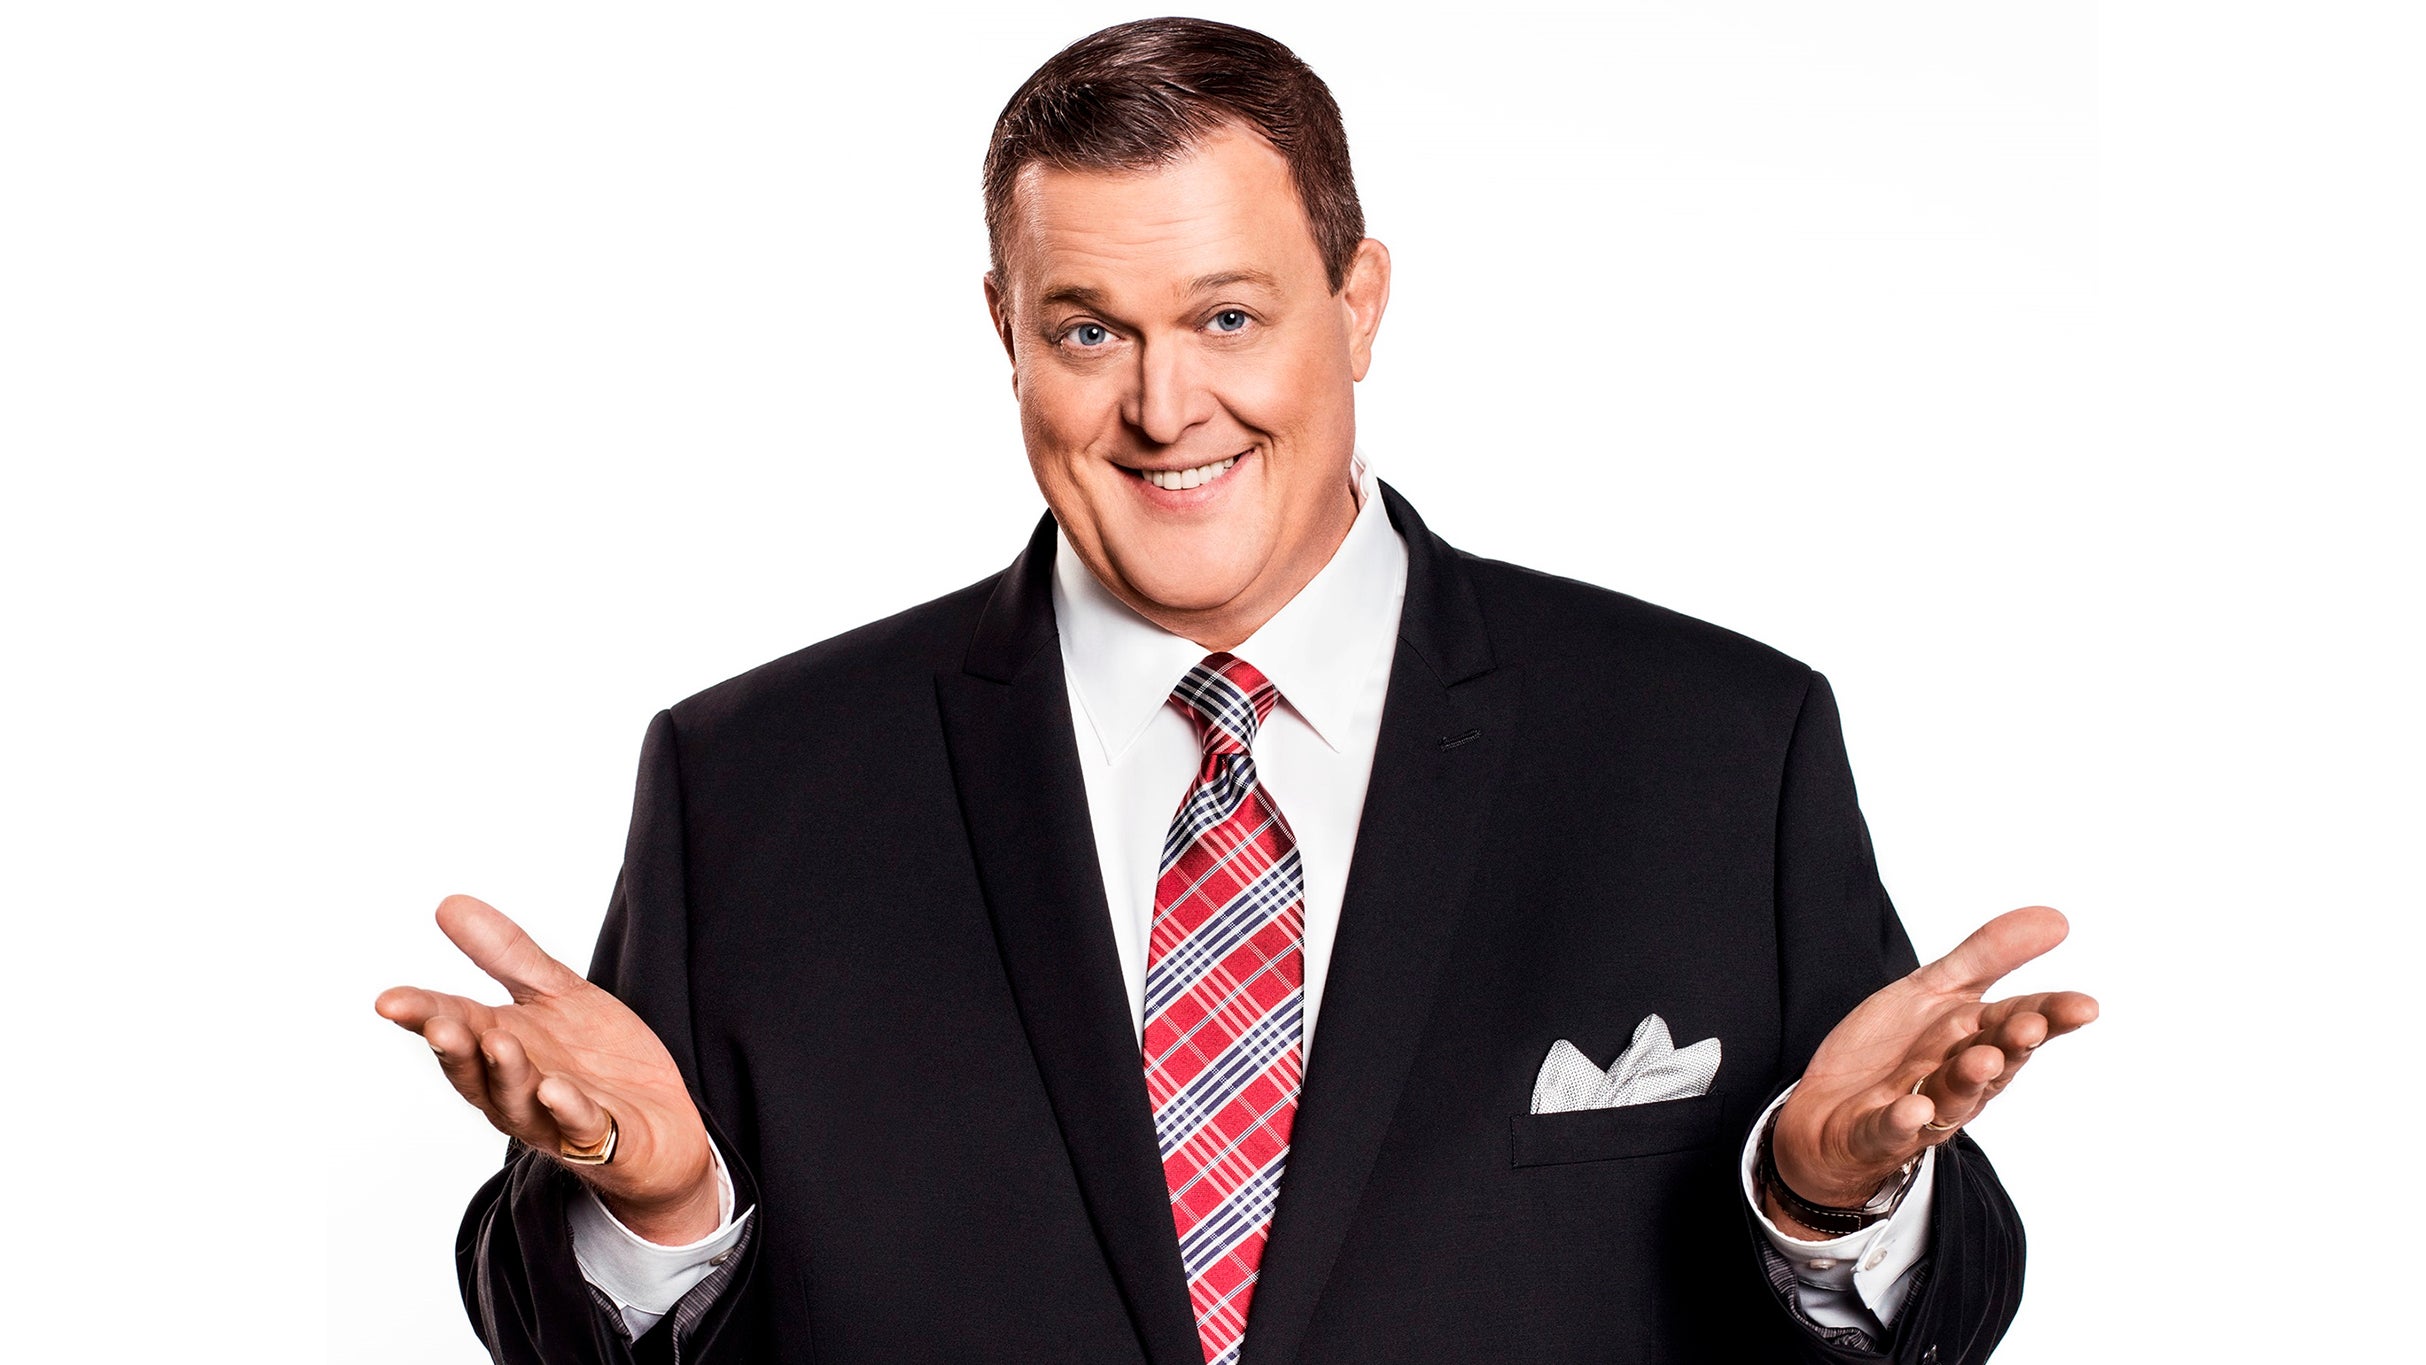 Billy Gardell in Boston promo photo for Official Platinum Onsale presale offer code